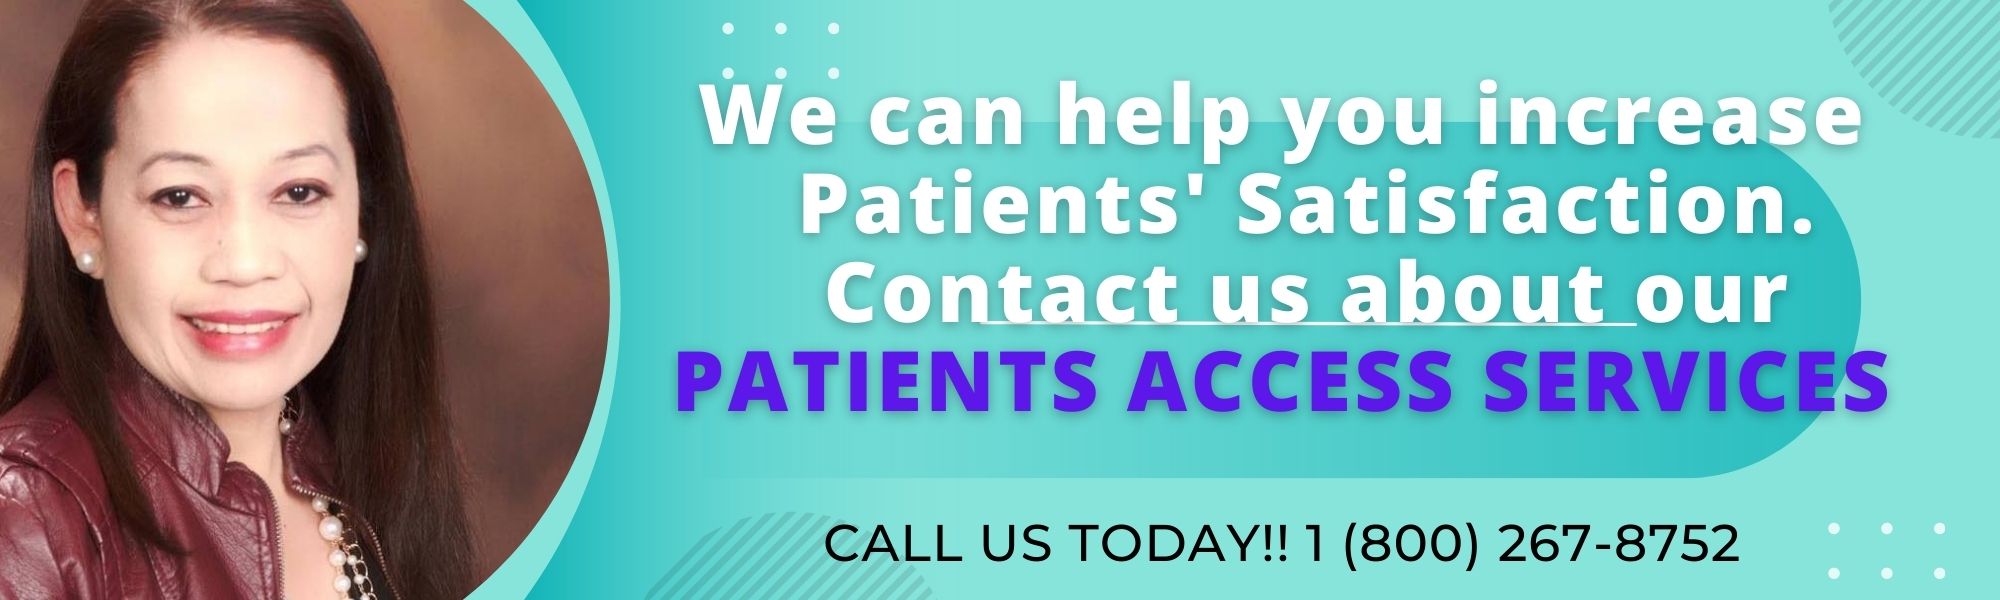 Insurance Prior Authorization Services, Patients Access and Medical Documentation Reviews and Audits.